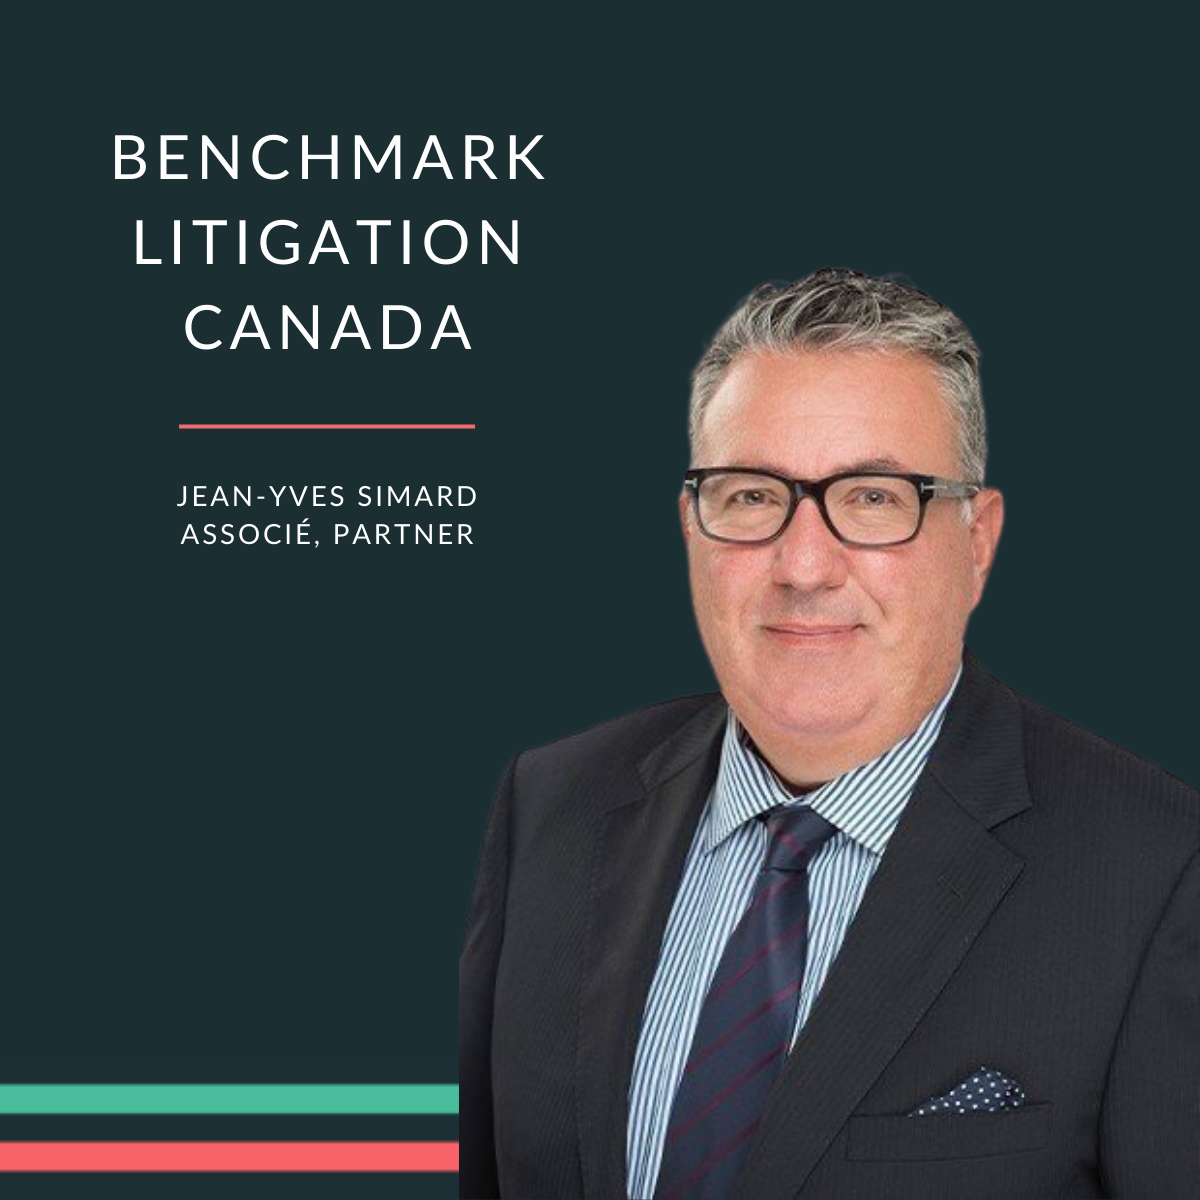 Jean-Yves Simard is recognized as a leader for his litigation expertise by Benchmark Litigation Canada